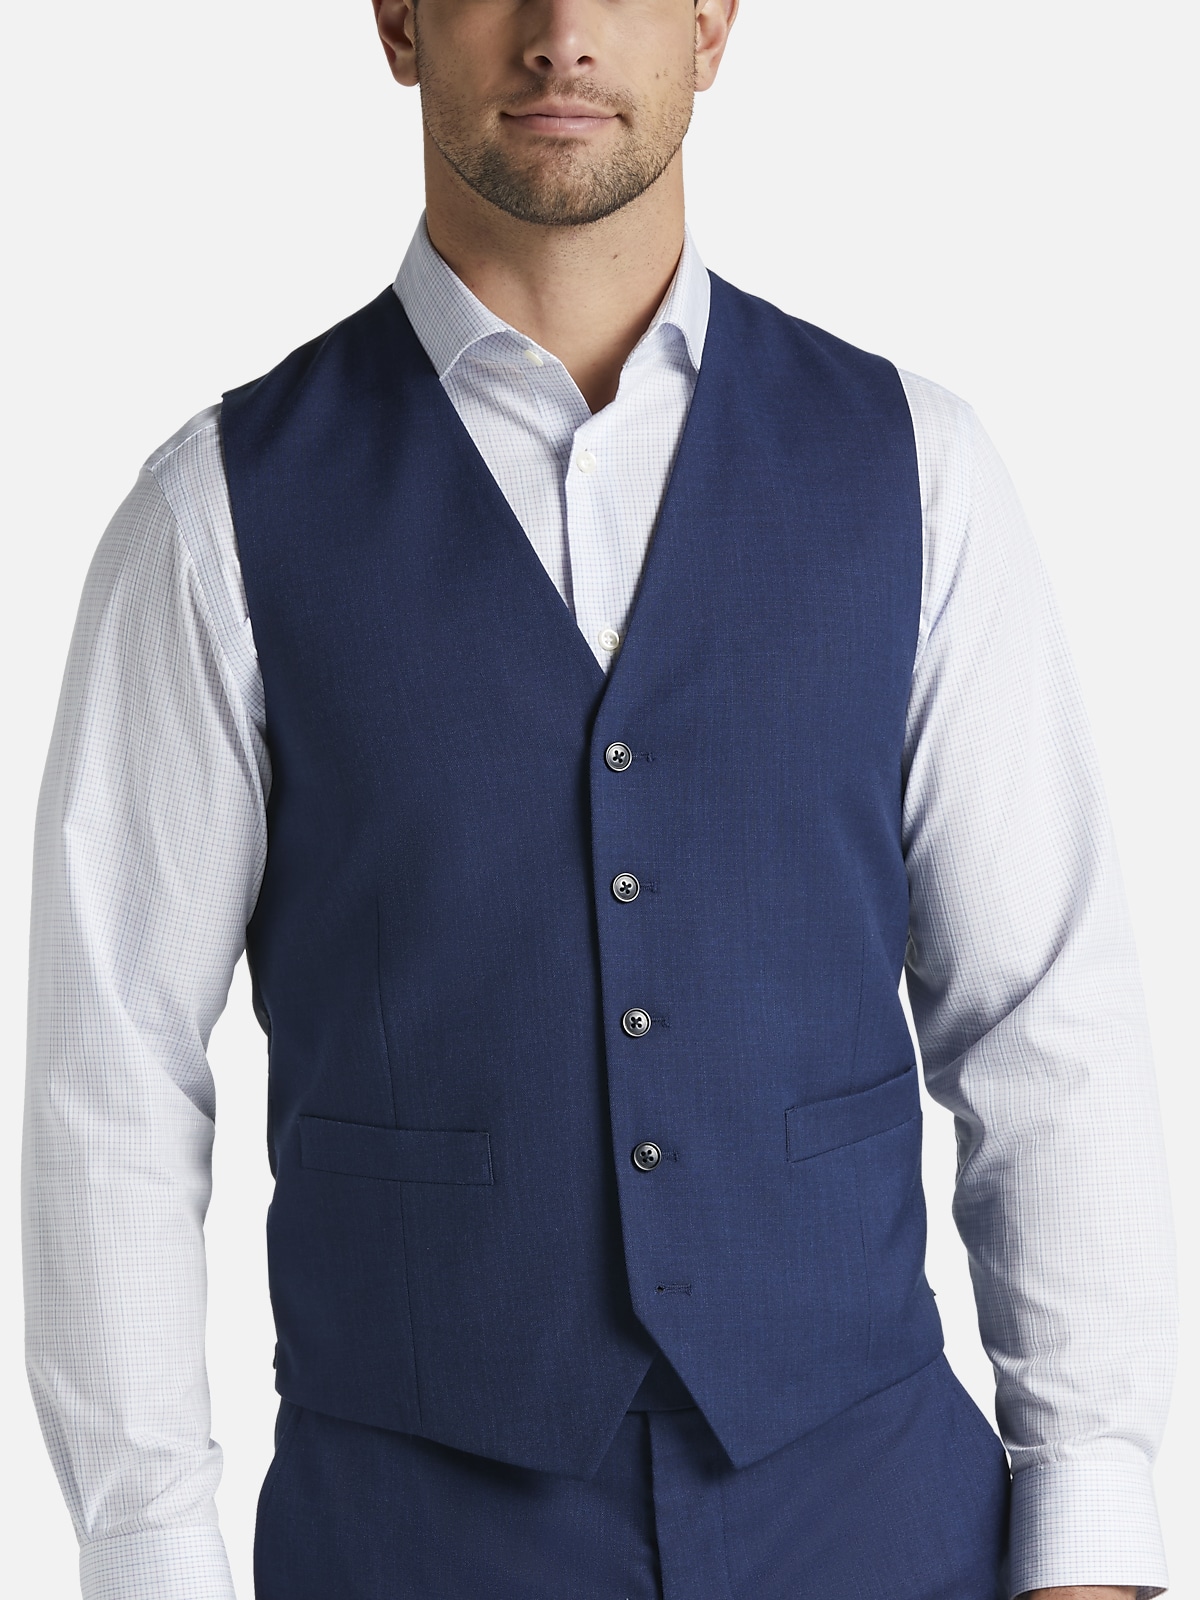 Pronto Uomo Modern Fit Suit Separates Vest, Blue | All Clearance $39.99 ...